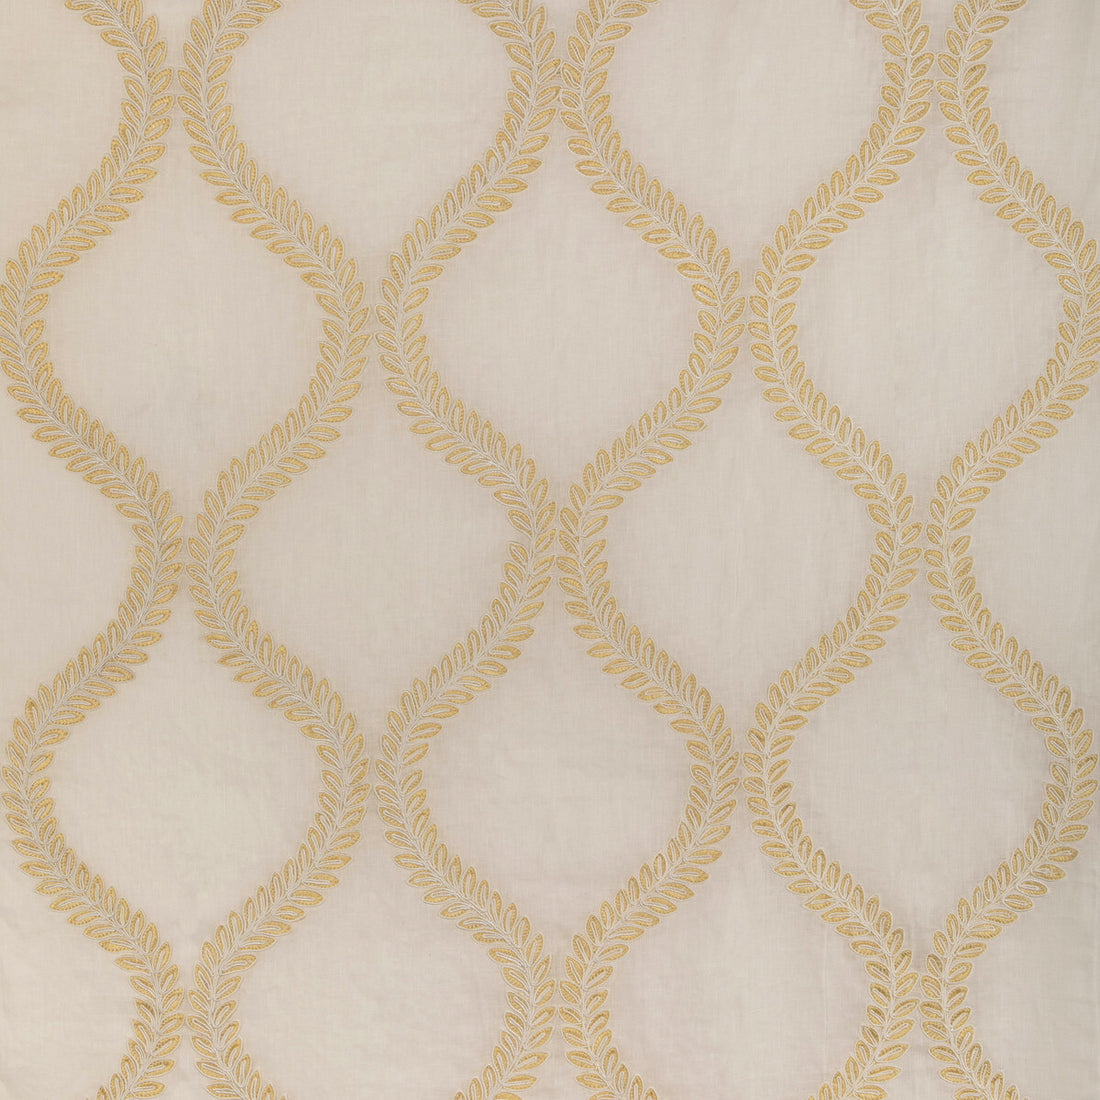 Camus Sheer fabric in yellow color - pattern 8023110.40.0 - by Brunschwig &amp; Fils in the Anduze Embroideries collection